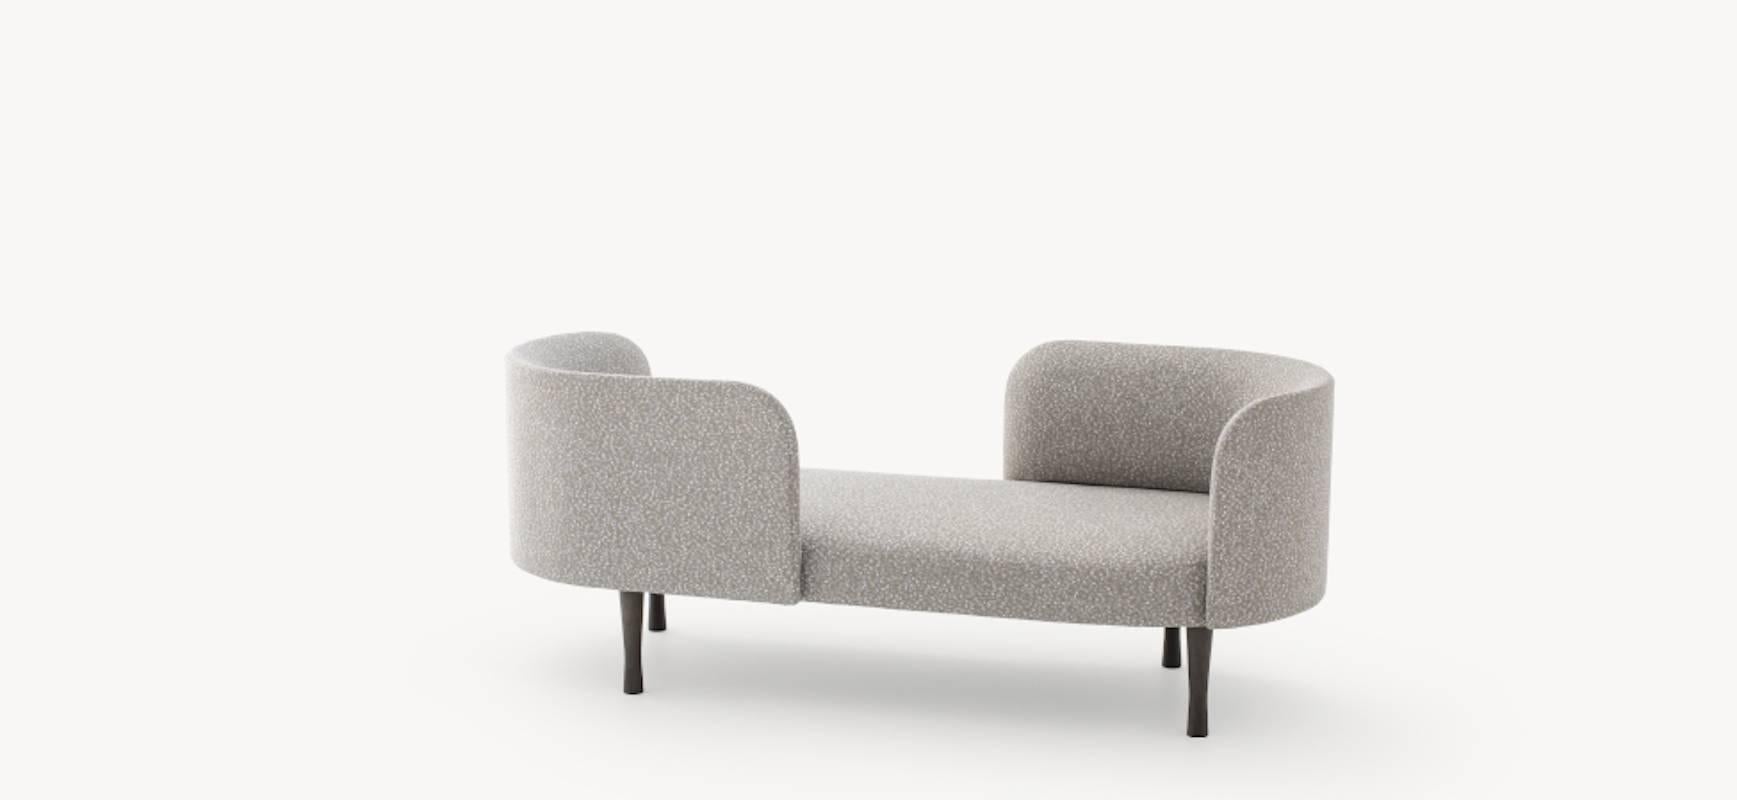 Josephine Vis à vis daybed bench in two sizes by Gordon Guillaumier for Moroso. 

Flame retardant polyurethane foam and polyester fibre on wood frame. Feet in varnished ash. Glides in polyethylene. 

Two sizes are available: 

63